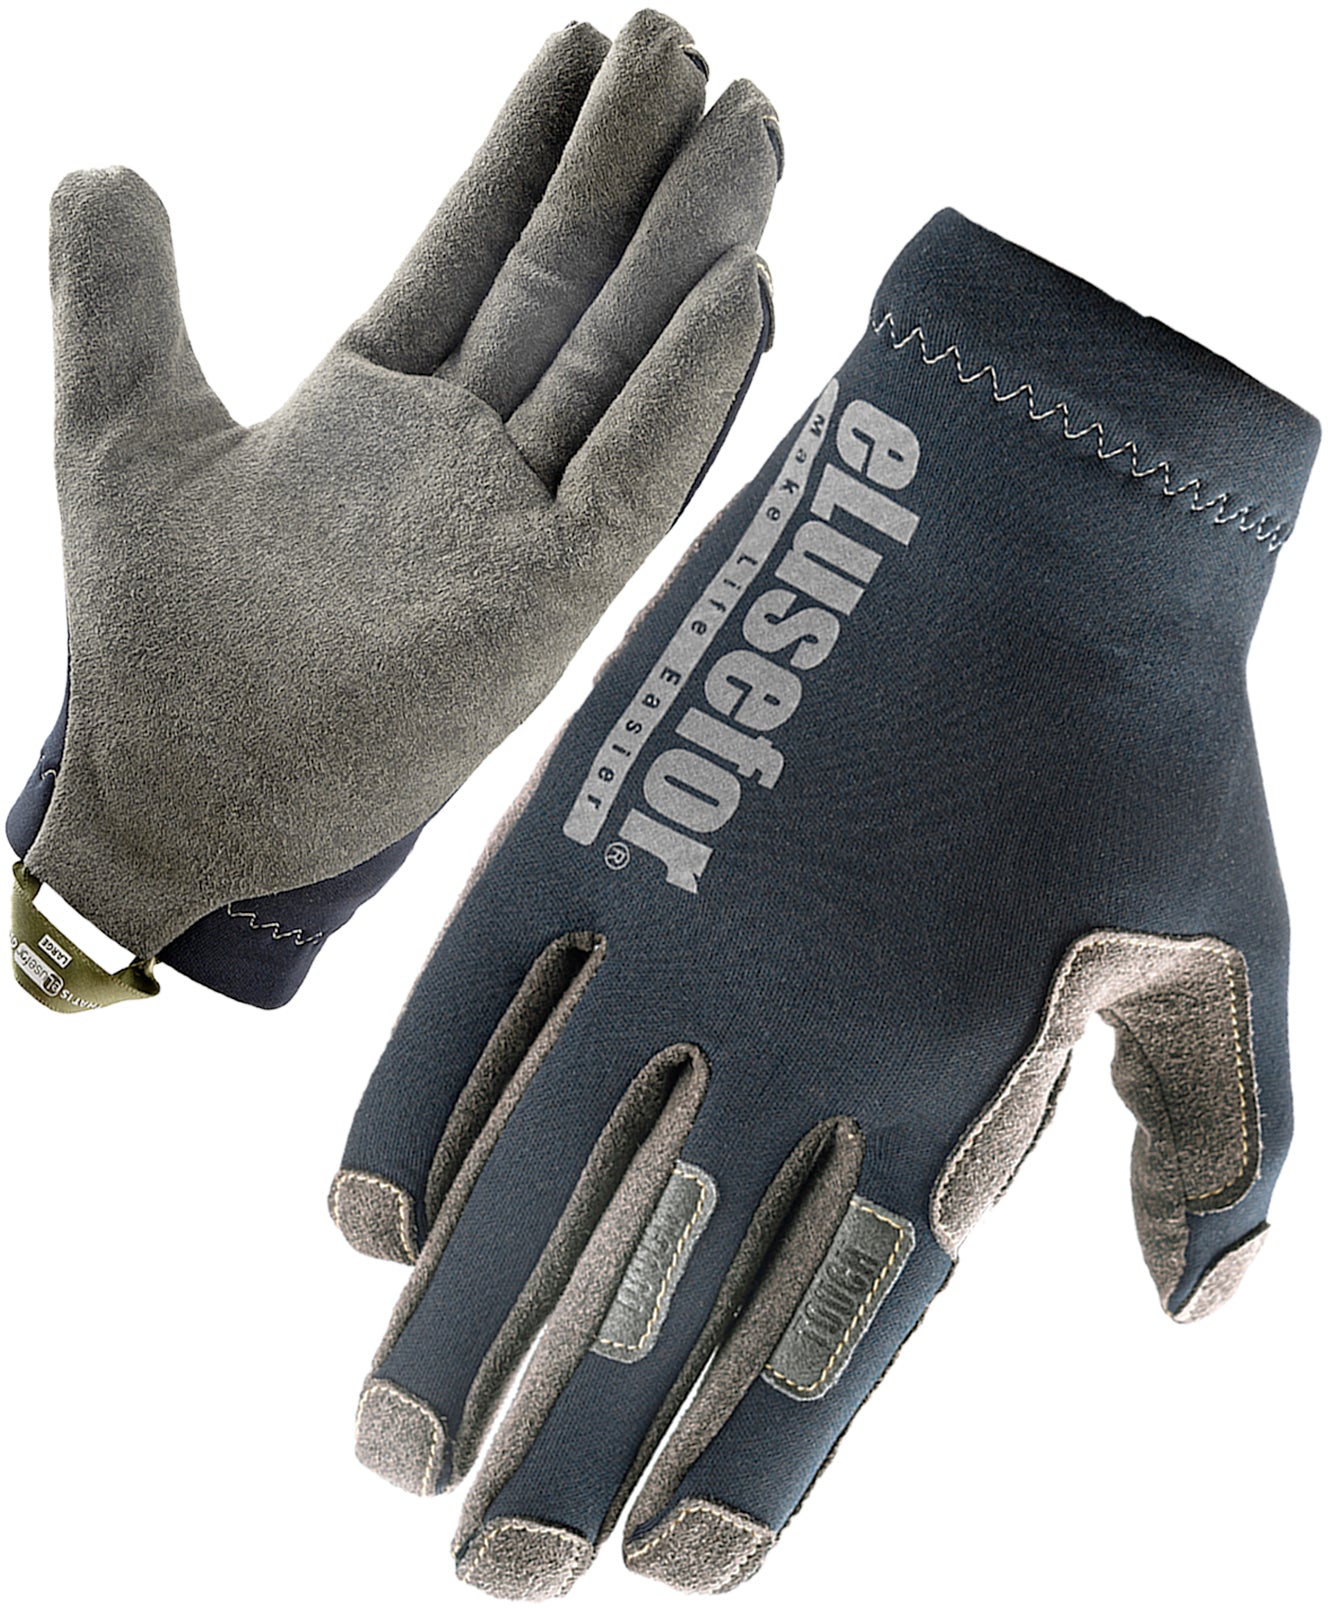 Easy Fit Men's Gloves, .6mm Durable Palm, ClickPoint Touch, No for Badges, Navy/ Grey